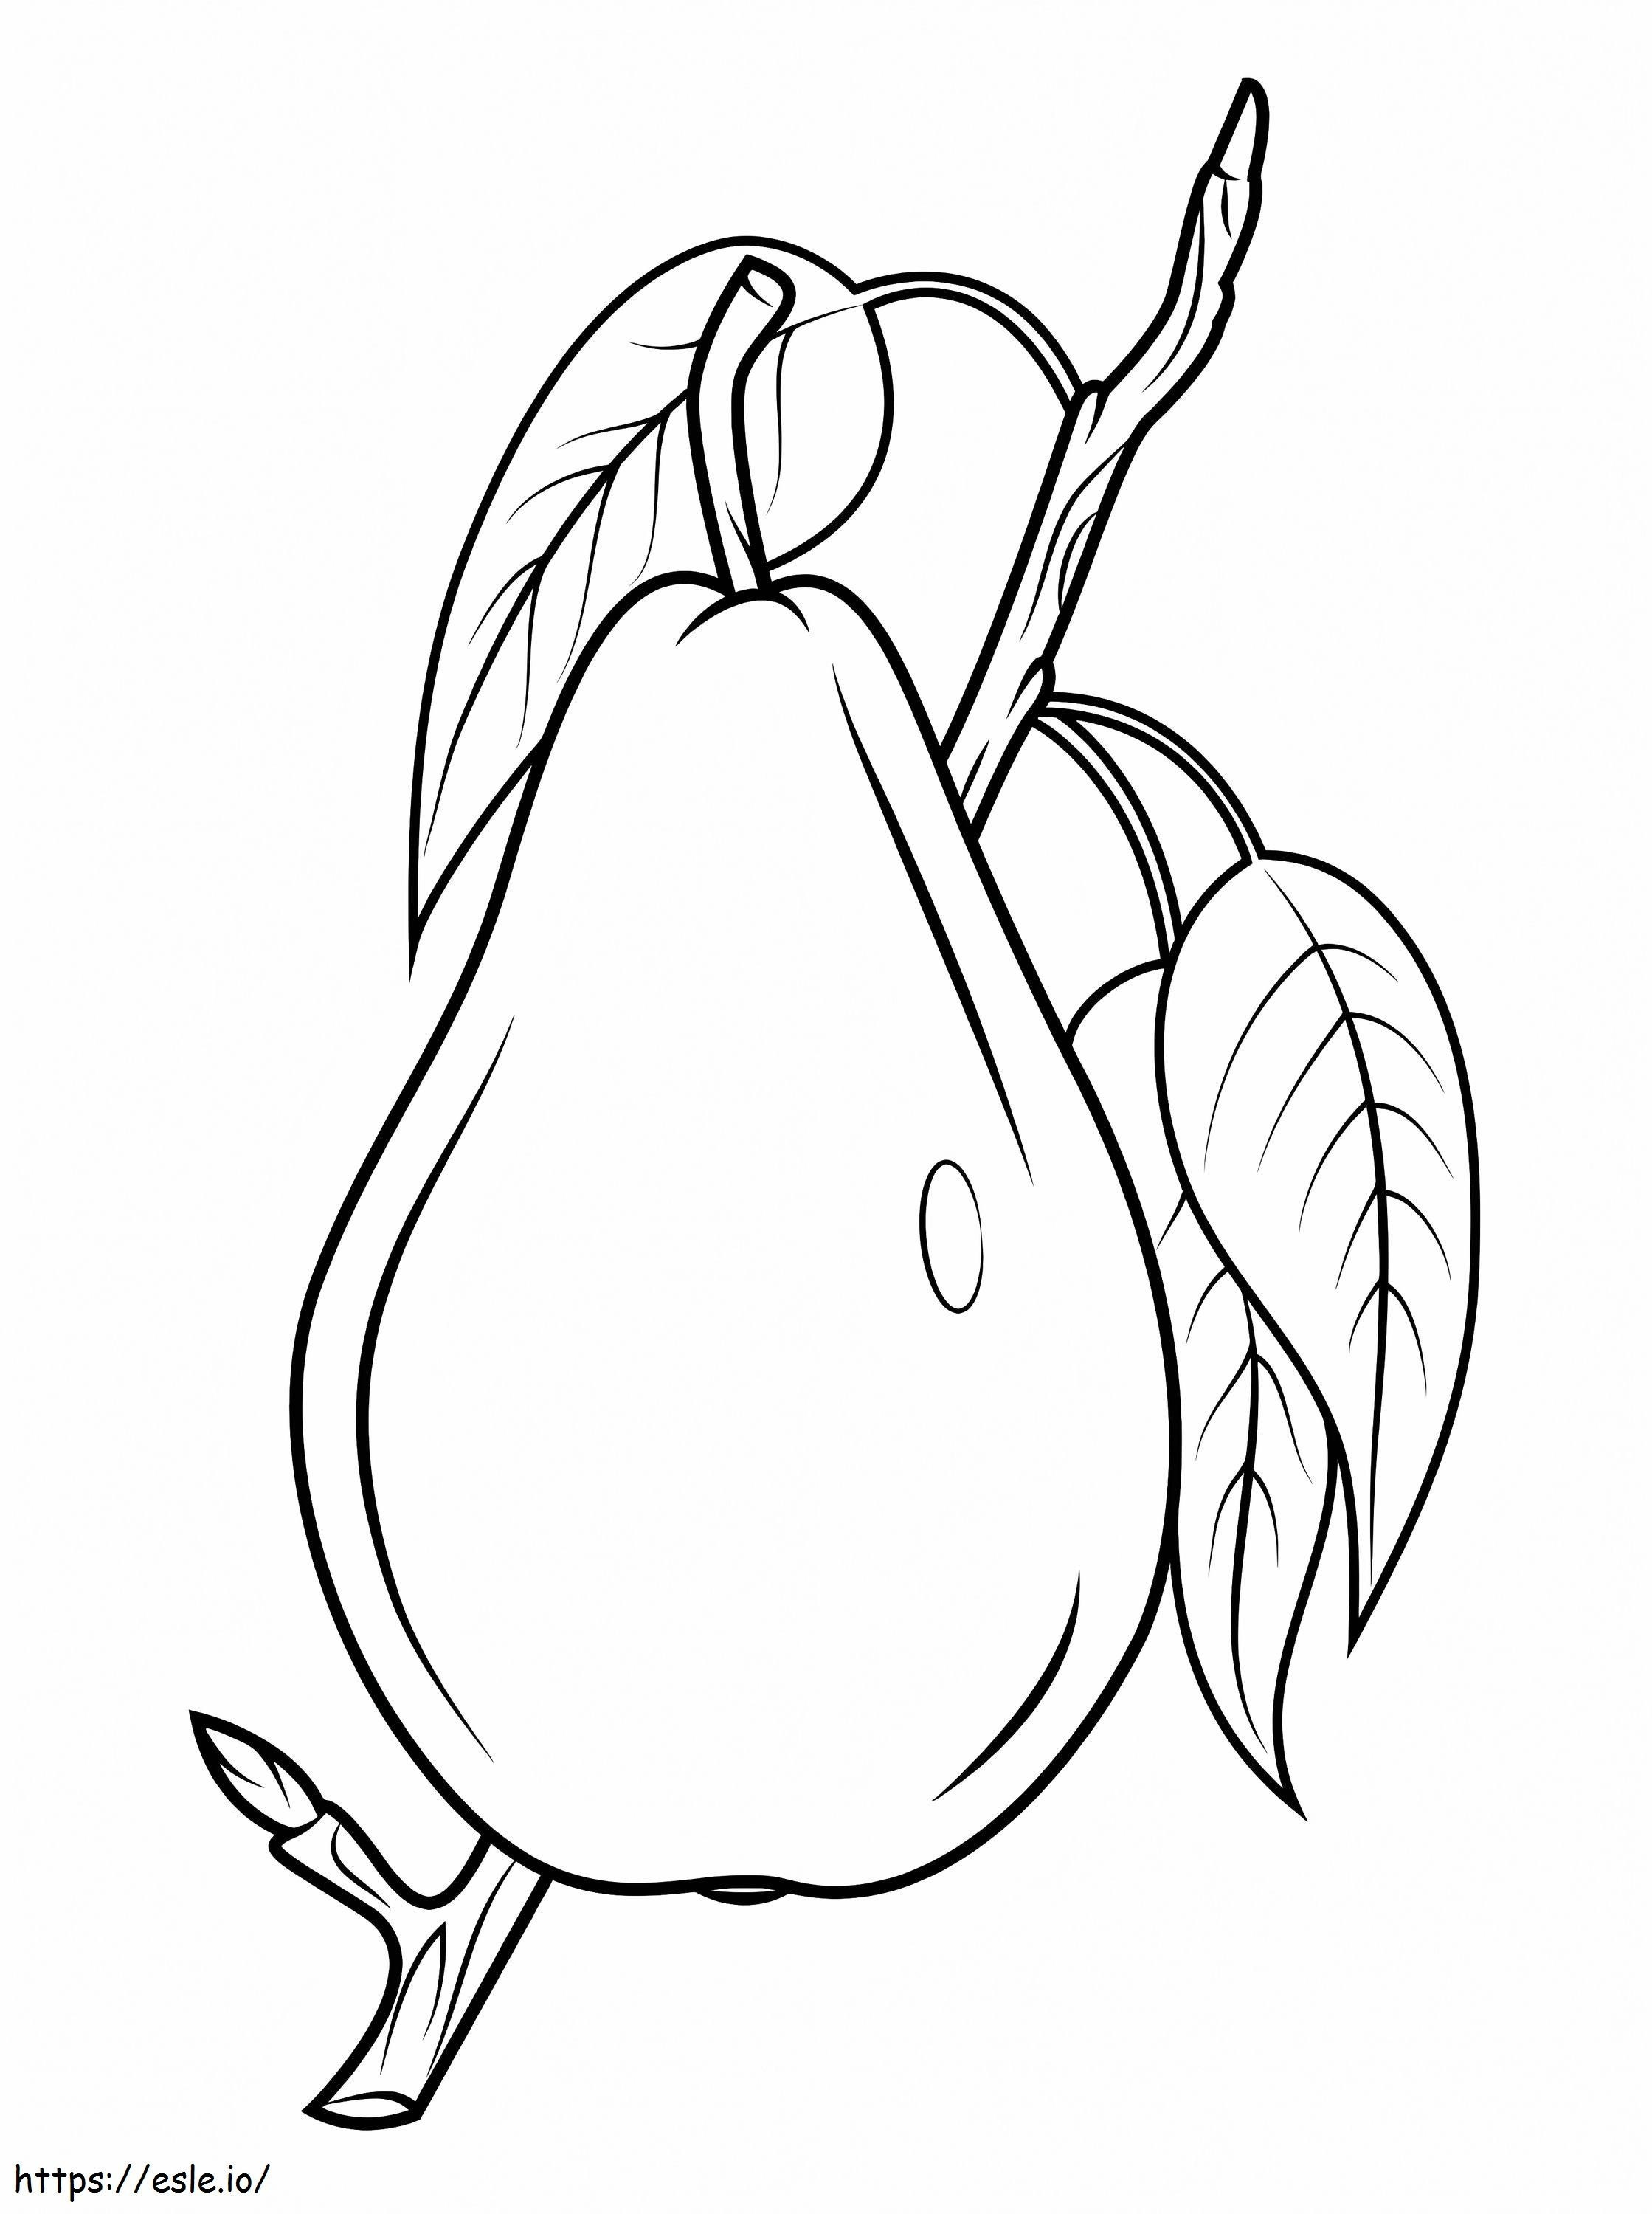 Pear On A Branch coloring page